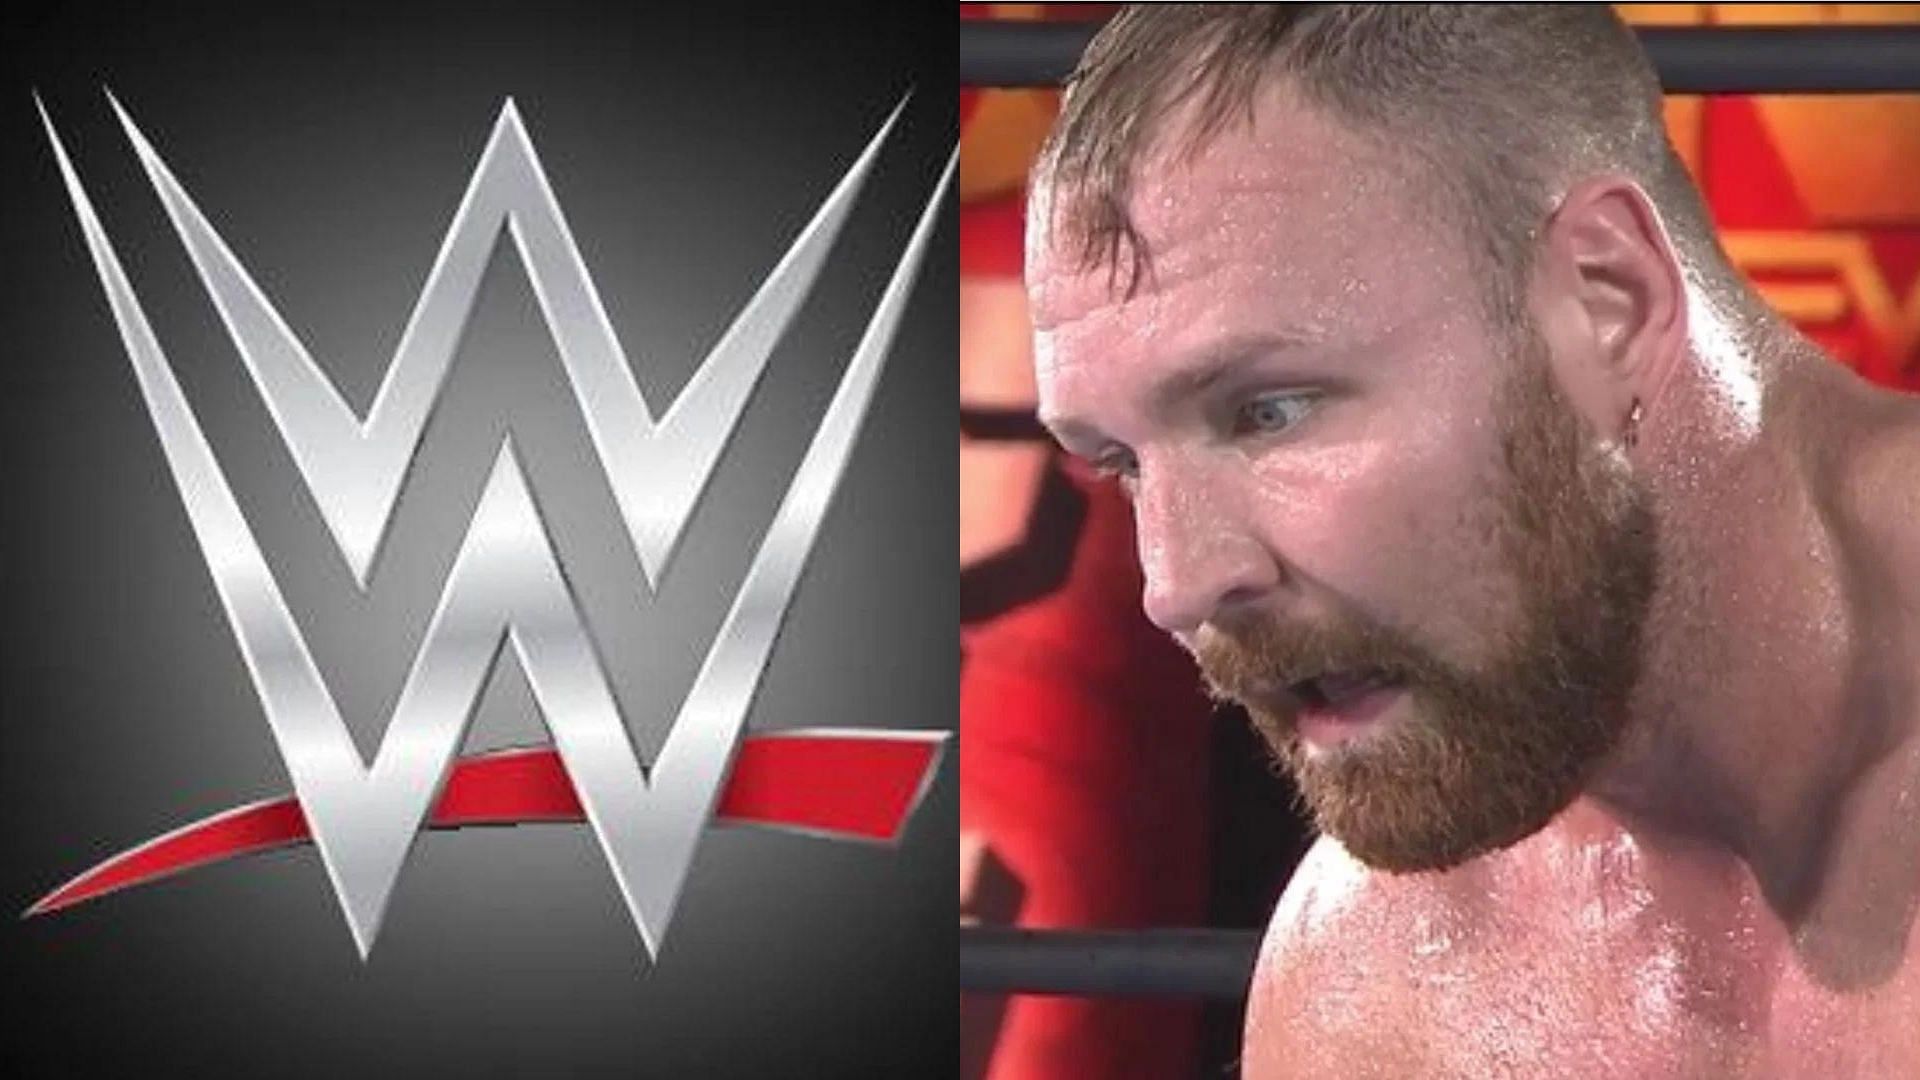 Jon Moxley has taken part in some extreme matches